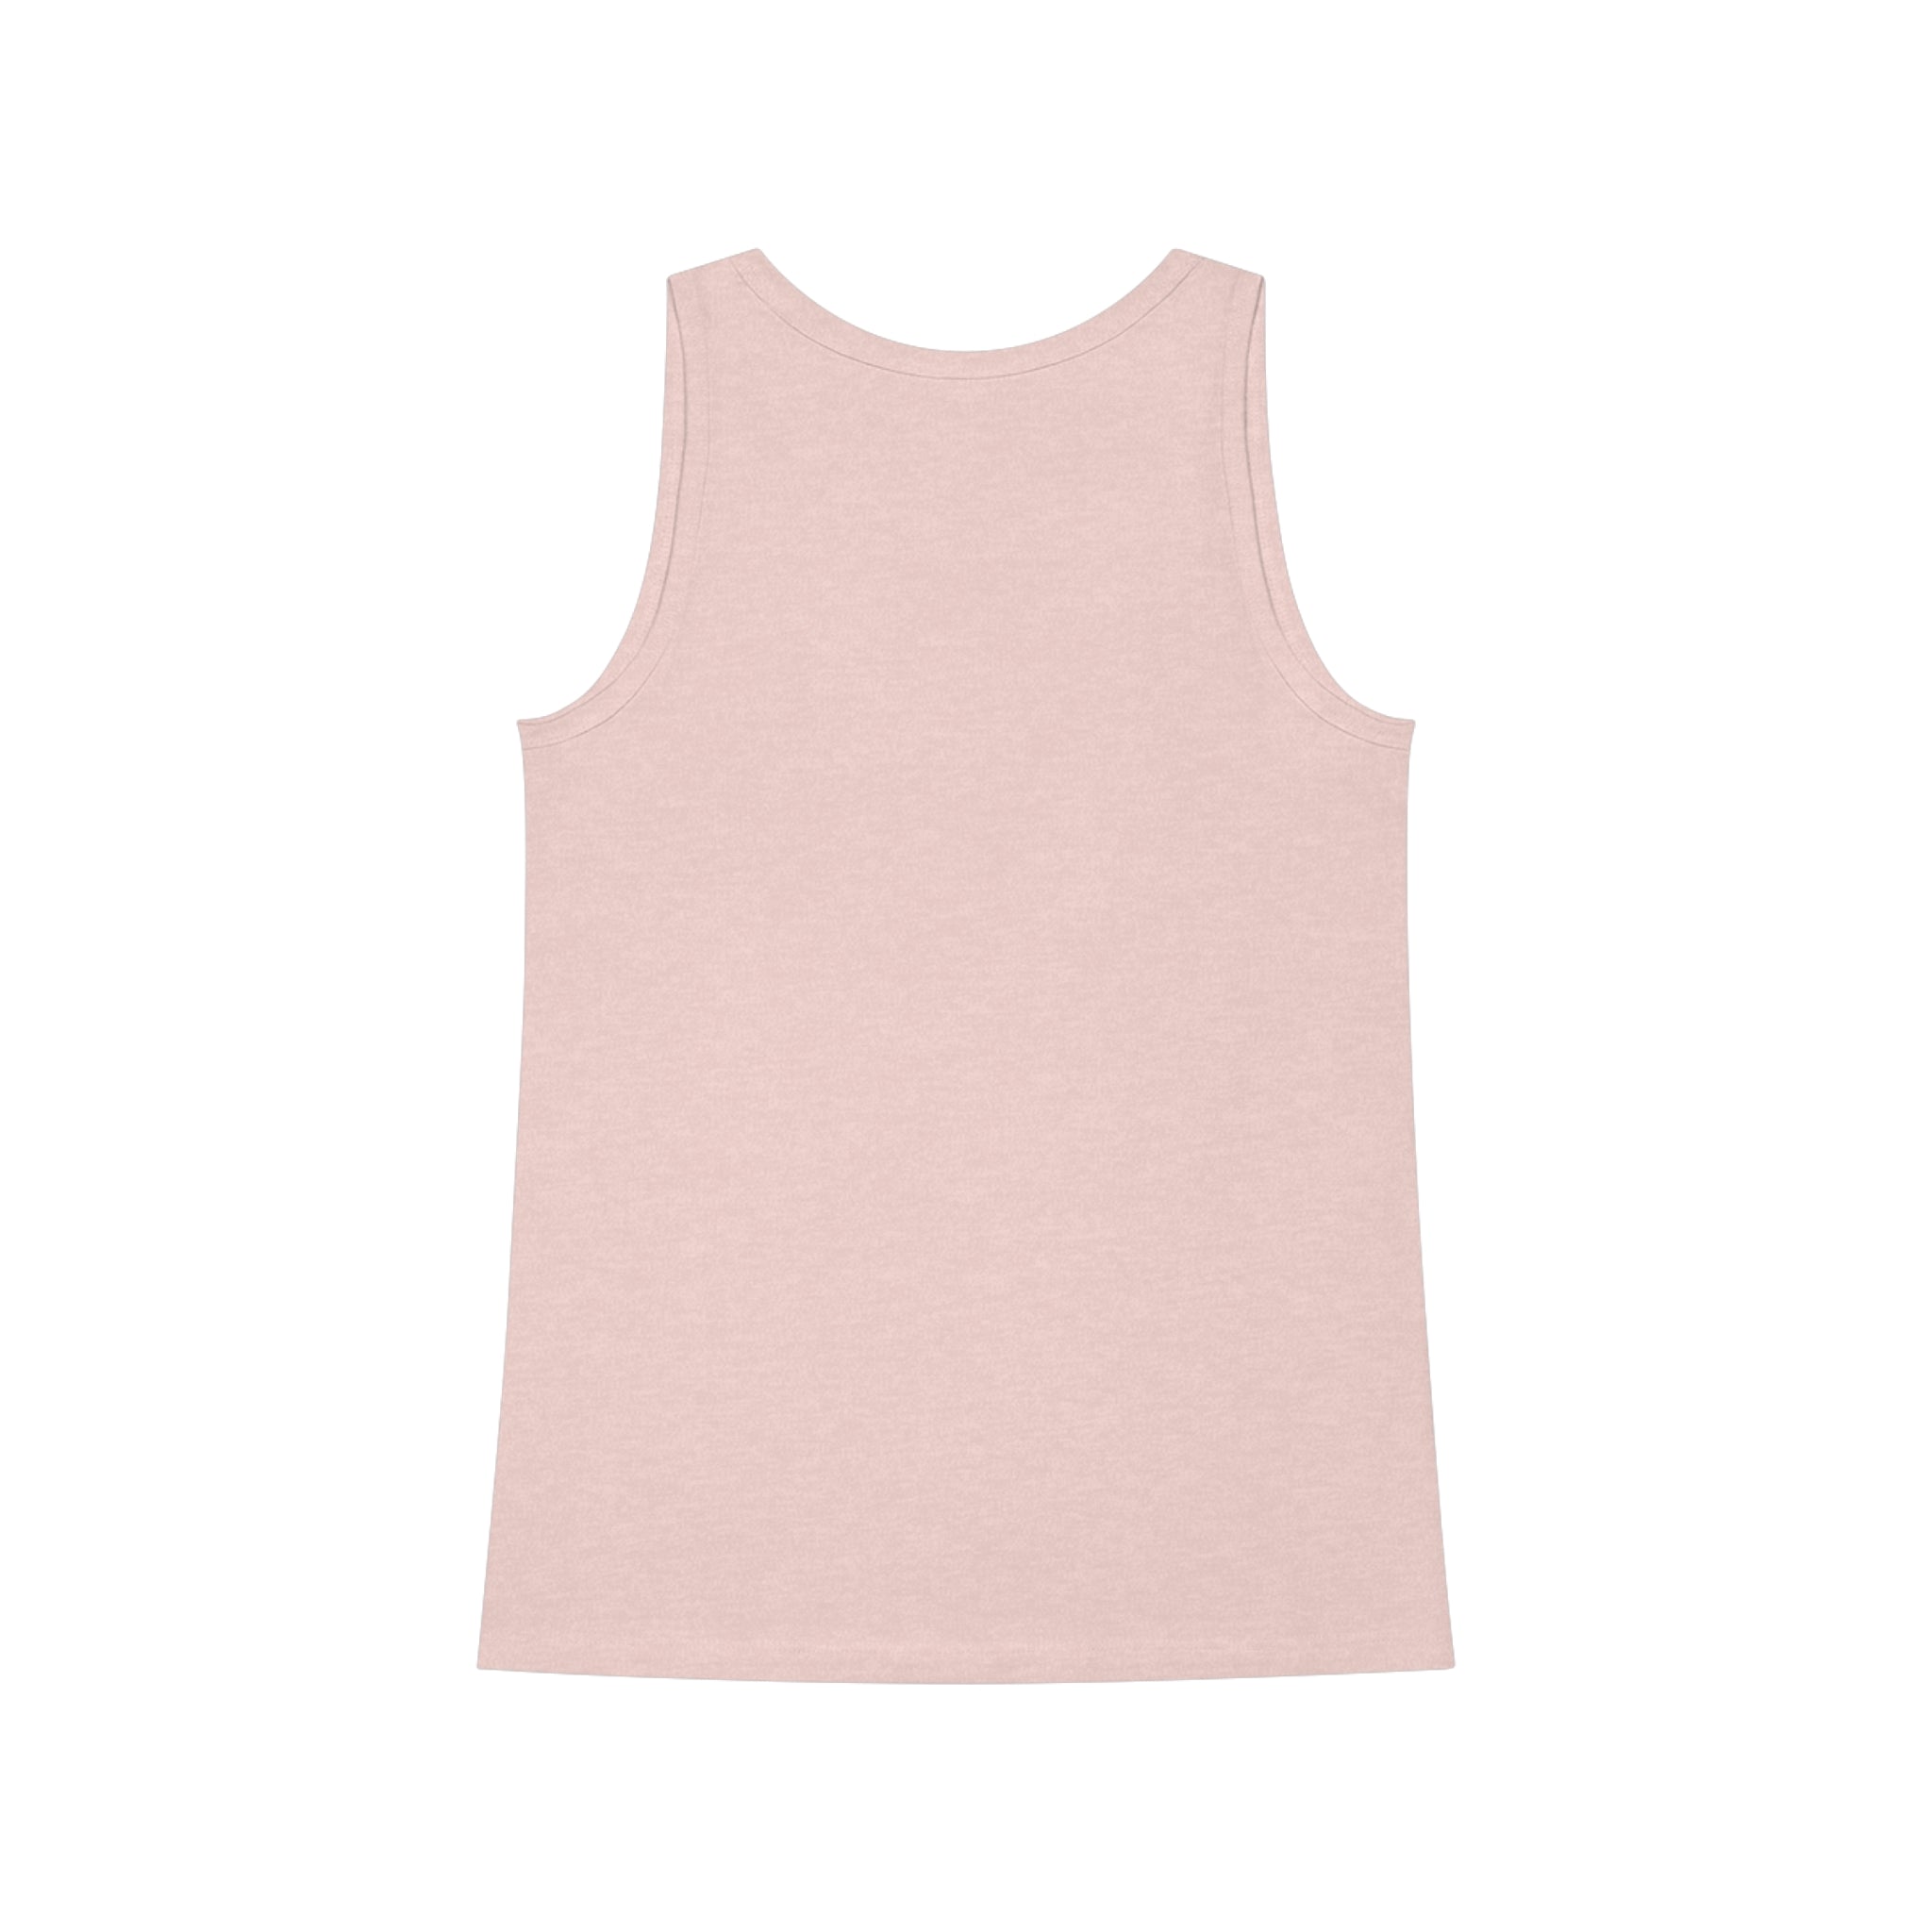 A women's lightweight Flowers Tank Top on a white background.